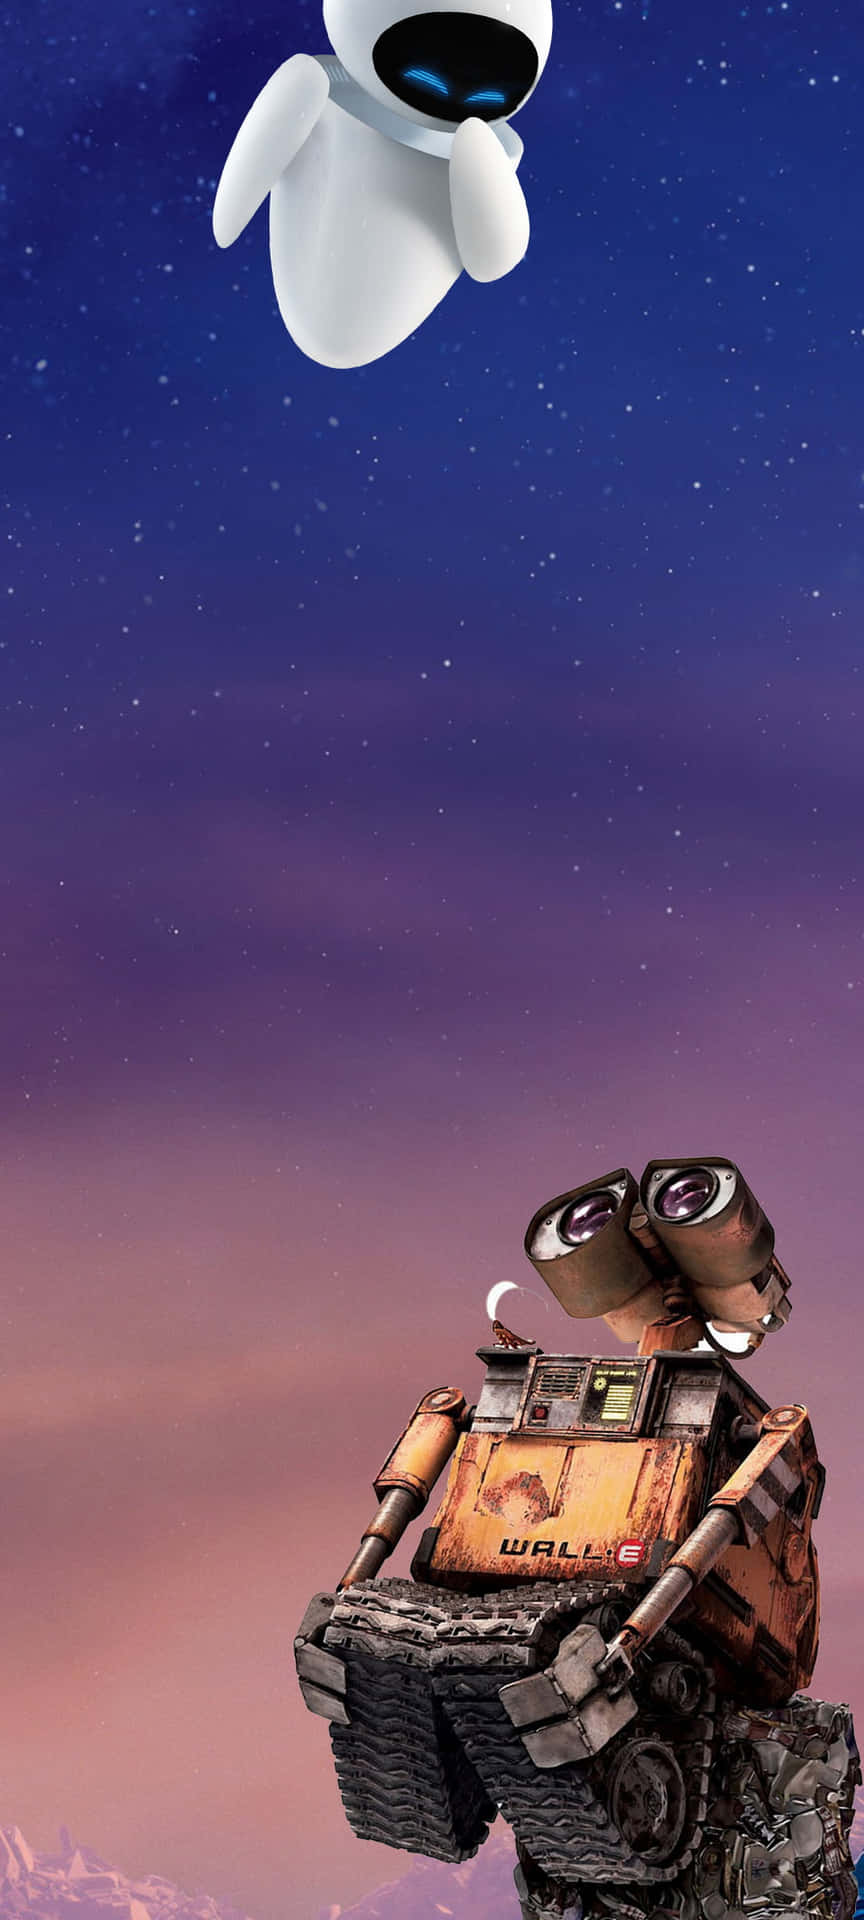 Wall E - The Movie Poster Background